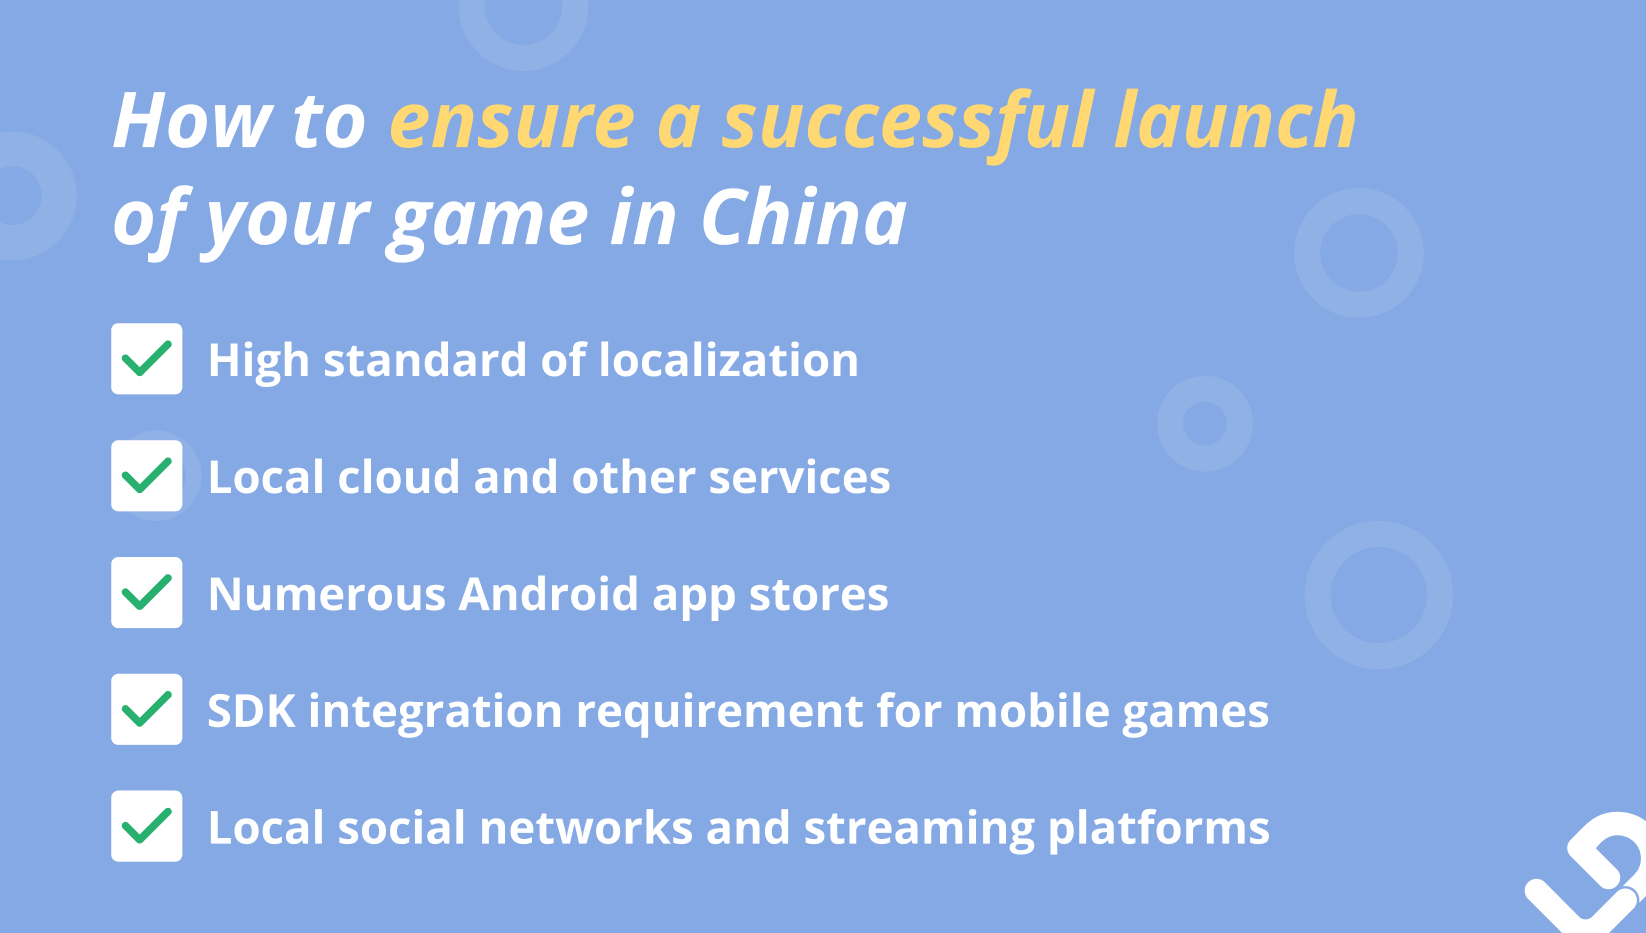 Important things to consider to ensure a successful launch of your game in China.